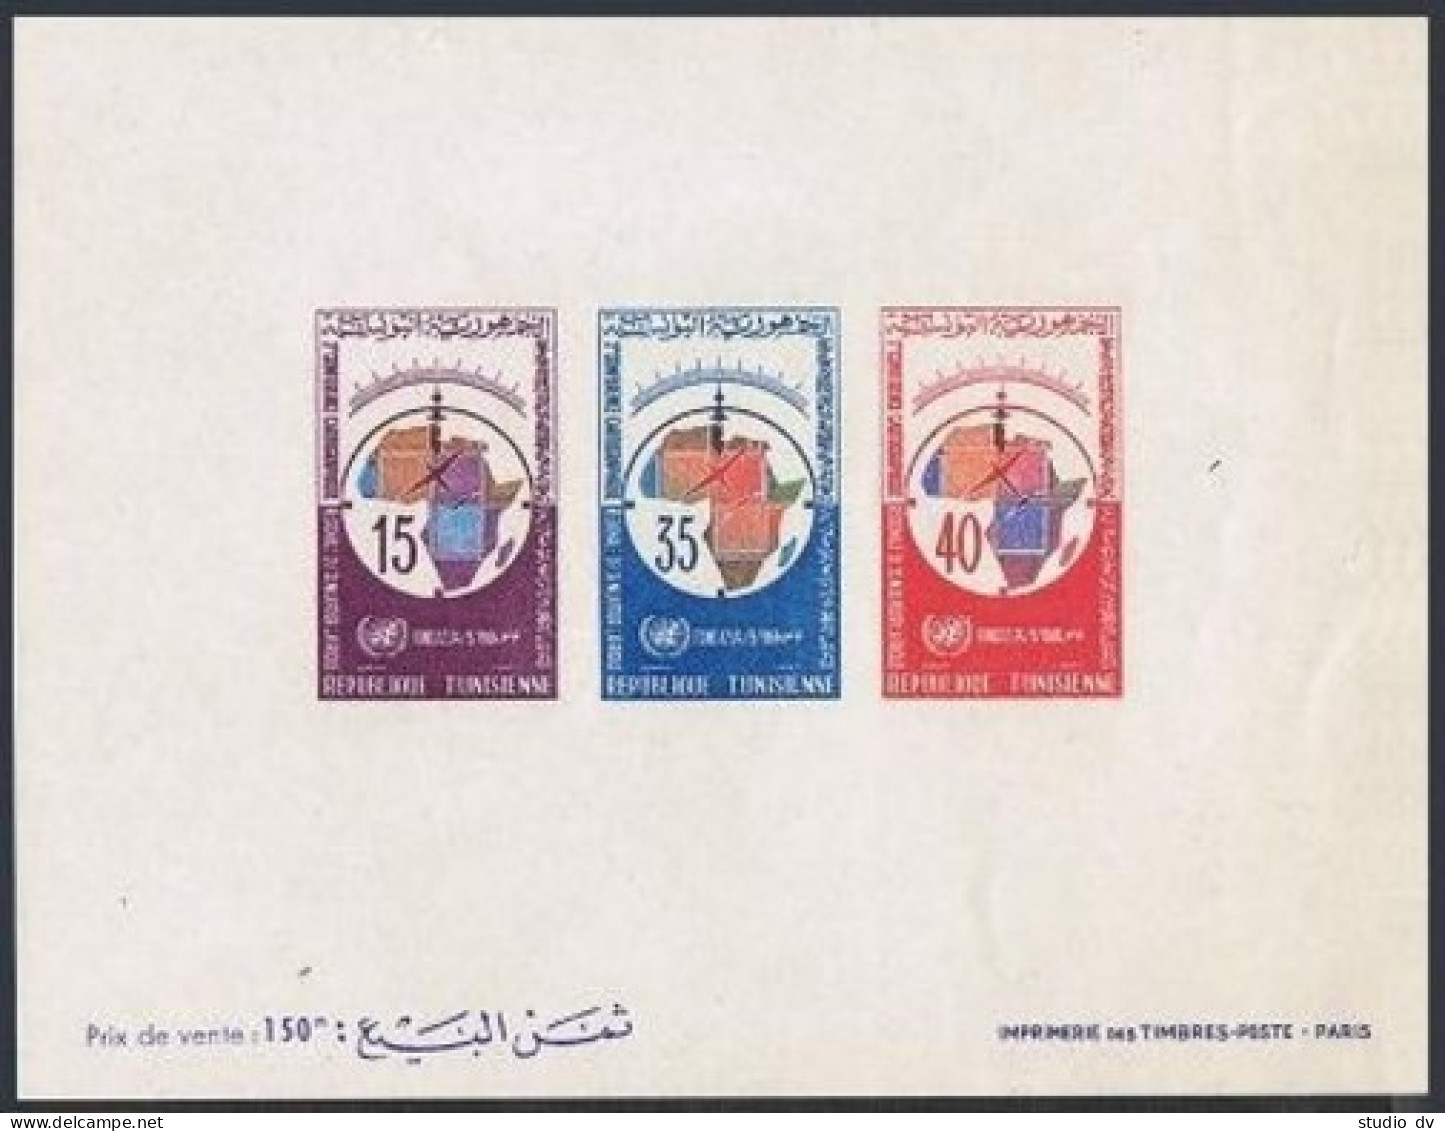 Tunisia 466a Imperf, MNH. Mi Bl.2B. Cartographic Conference For Africa, 1966. - Tunisie (1956-...)